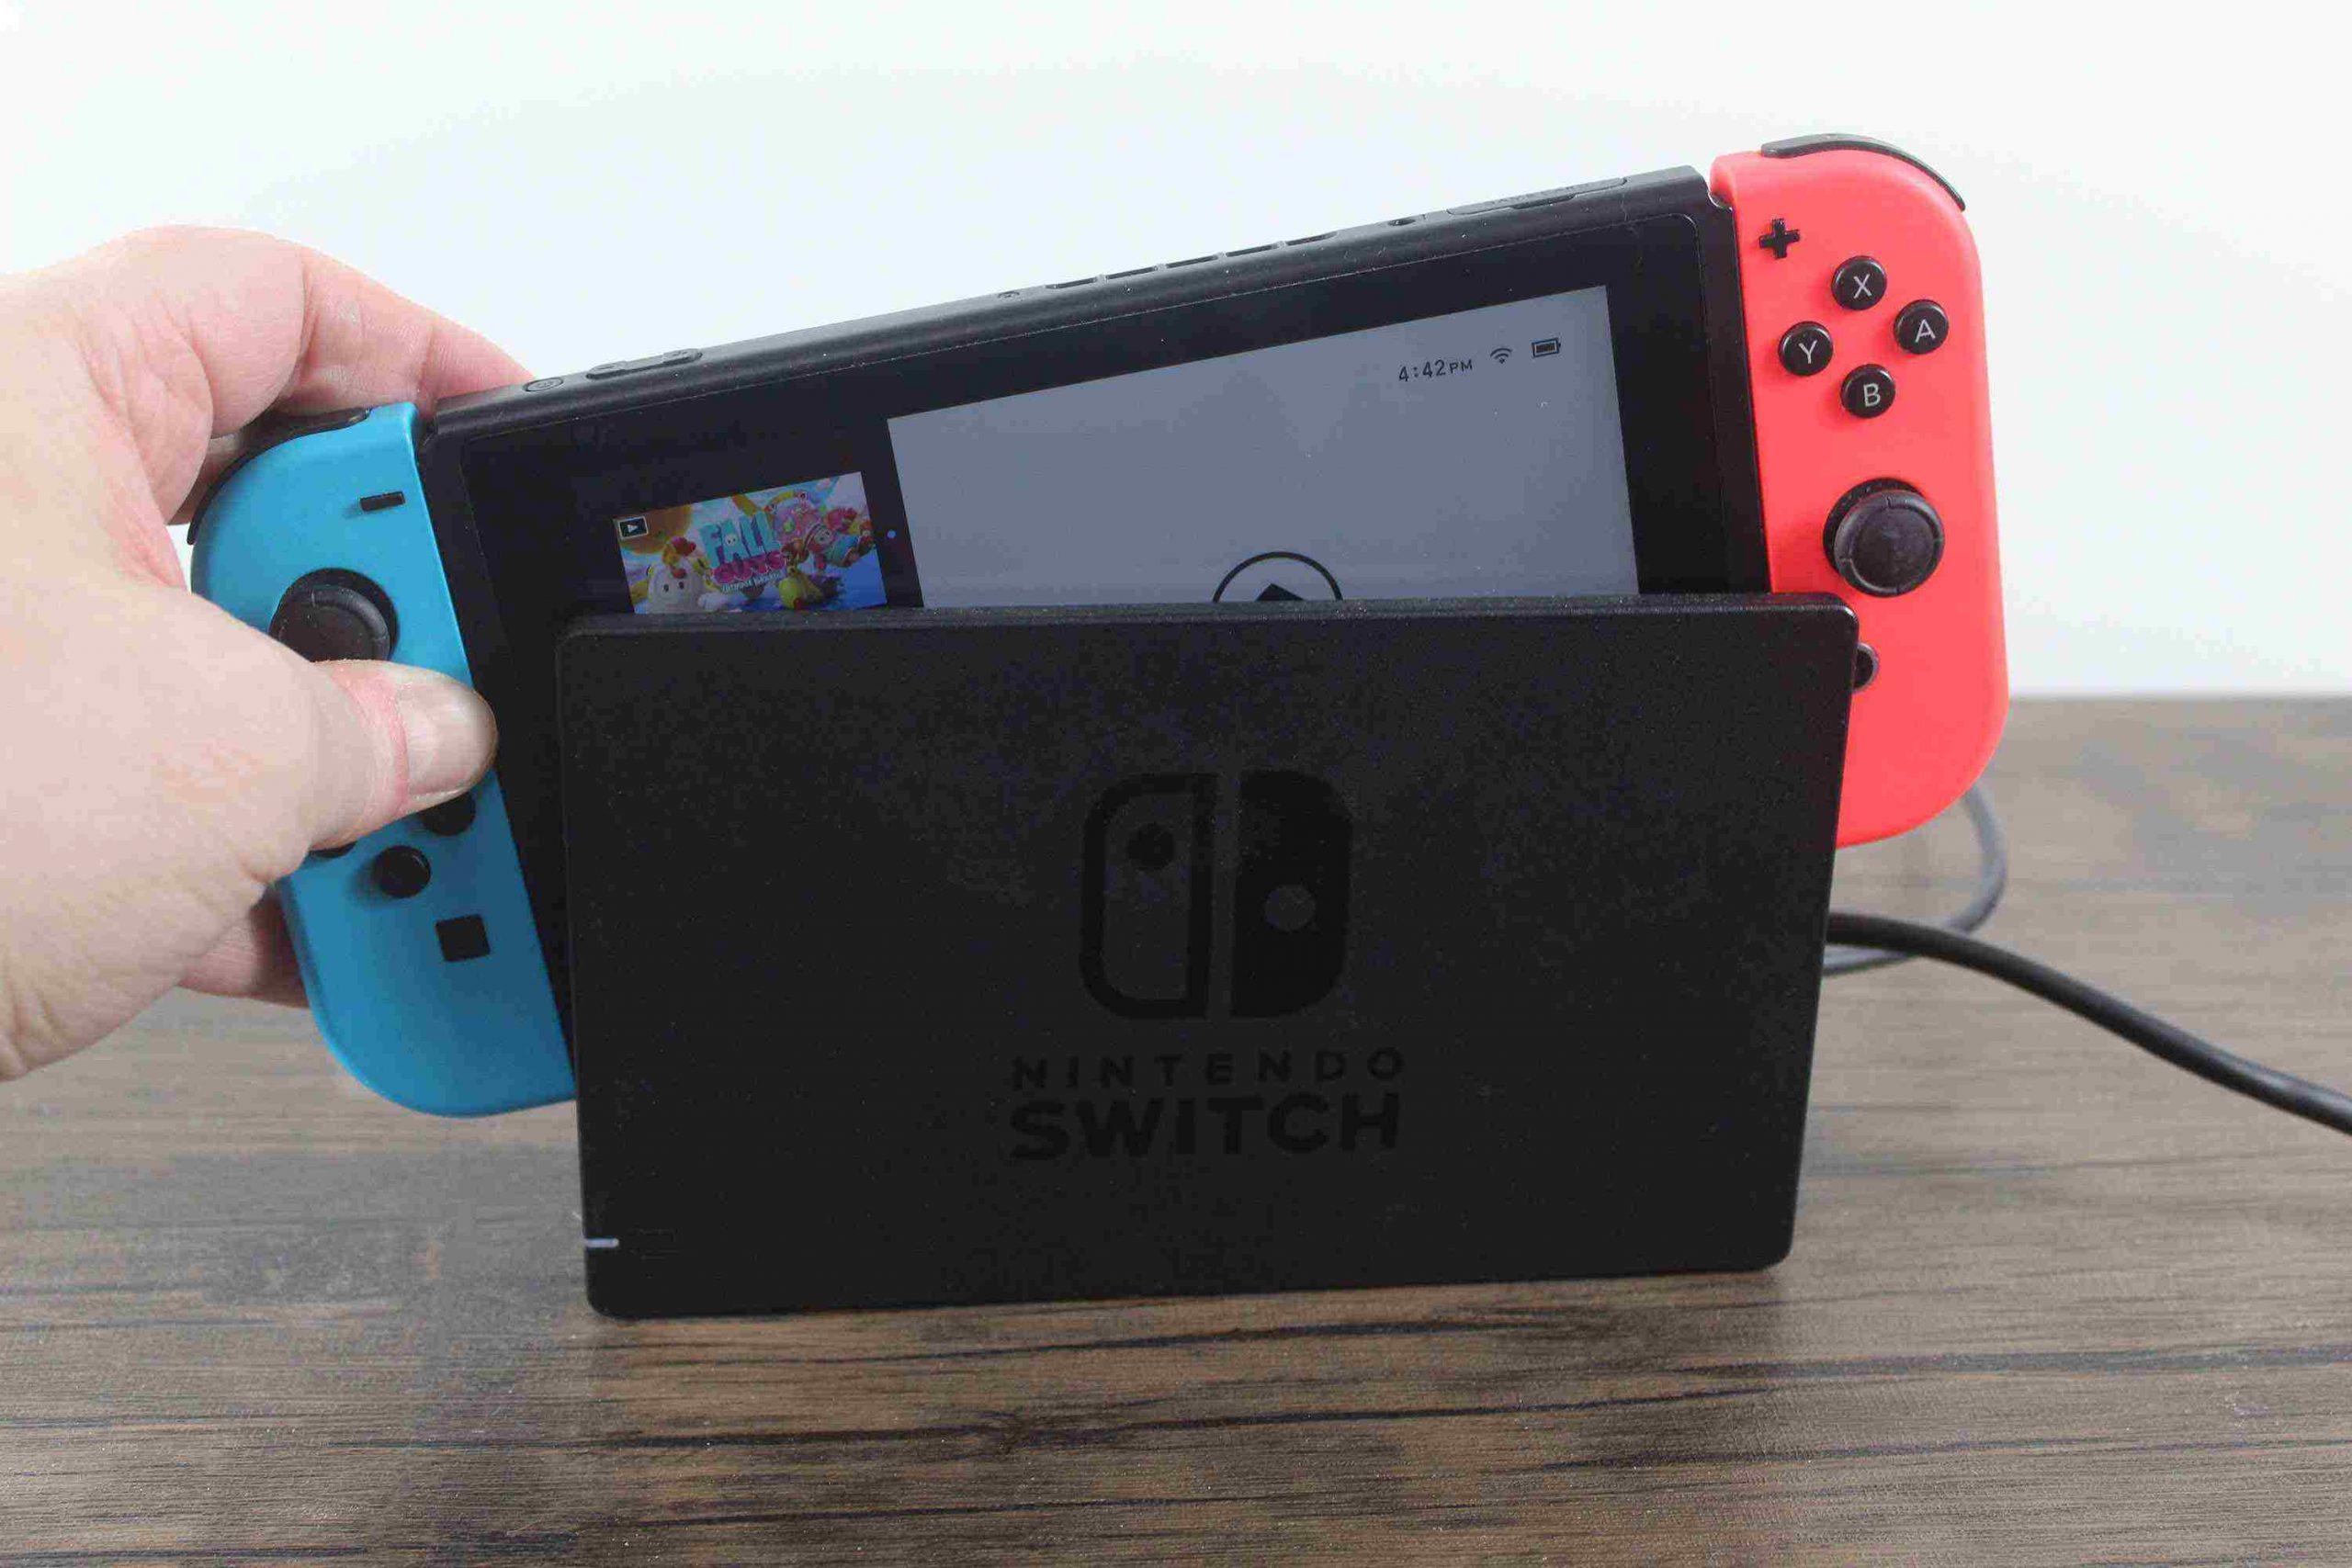 Connect the Switch to its dock